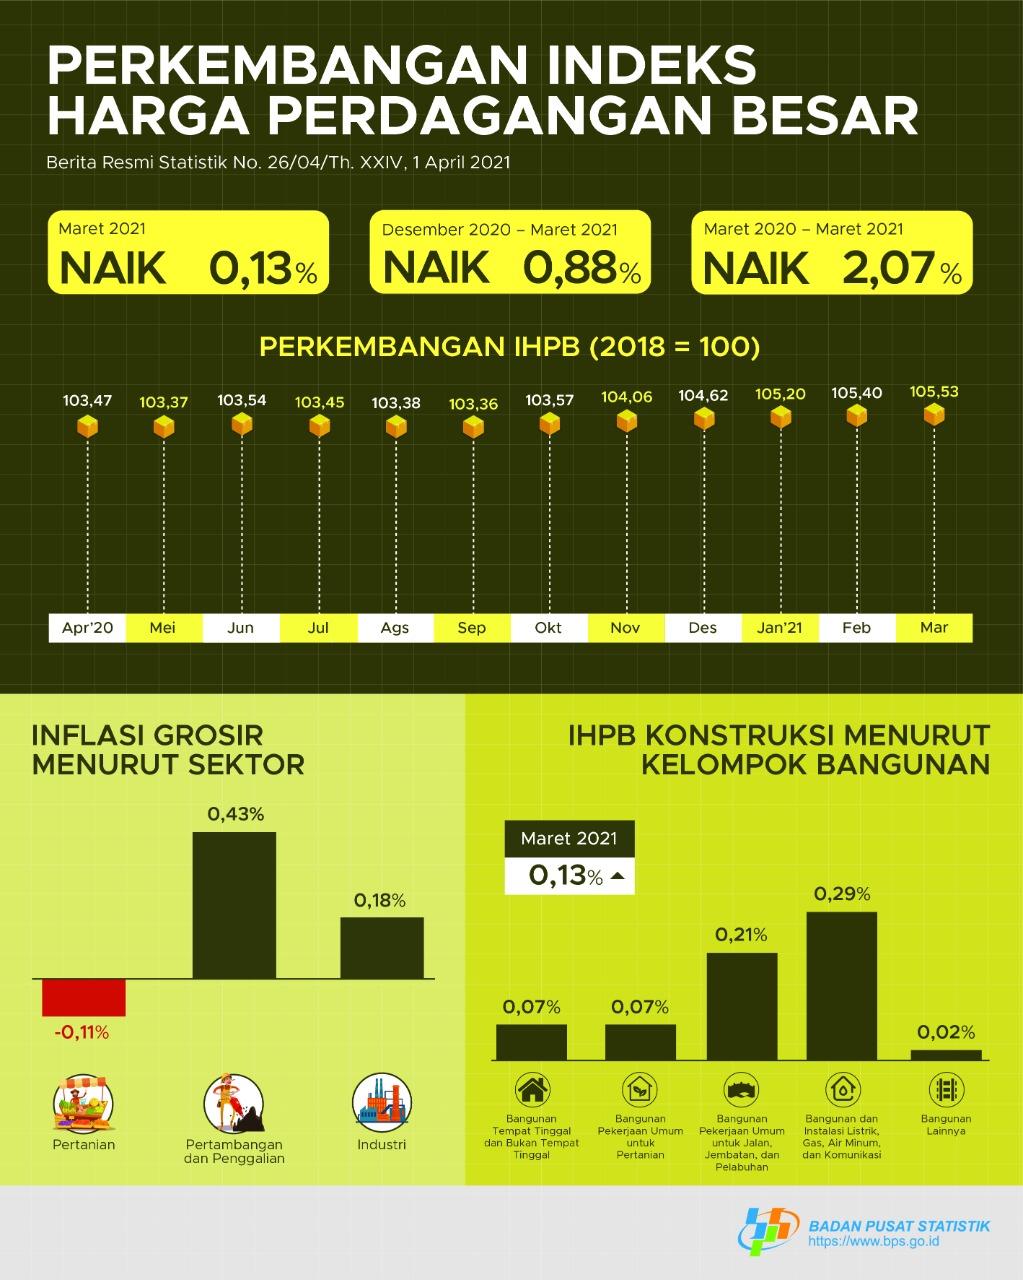 March 2021, General Wholesale Prices Index of Indonesia increased 0.13%